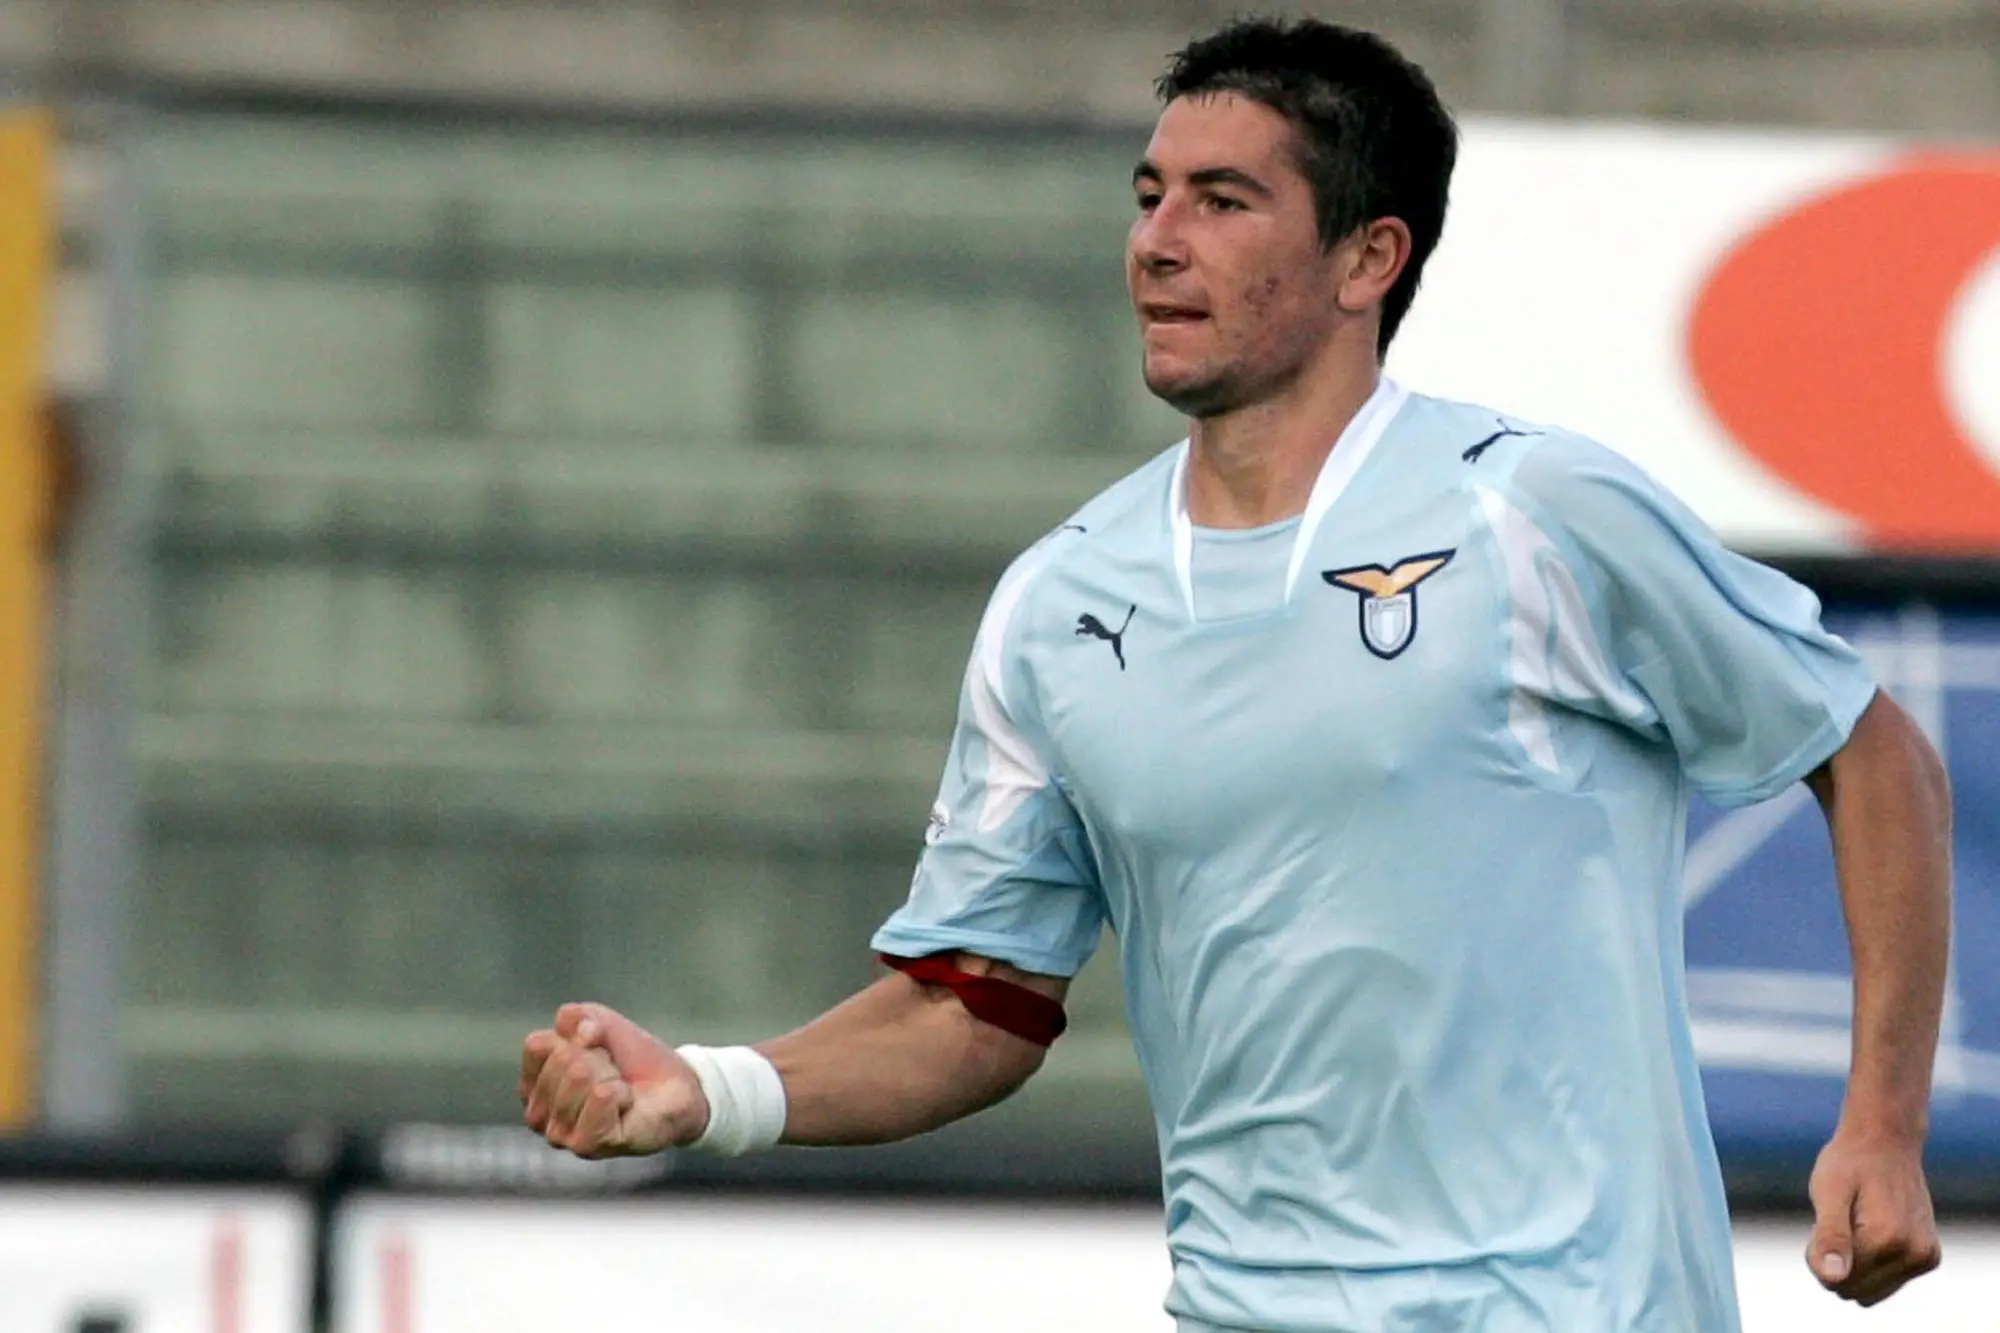 Lazio's defender Aleksandar Kolarov of Serbia Montenegro celebrates after scoring the equalizing goal during the Italian Serie A first division soccer league match between Reggina and Lazio at Reggio Calabria's Oreste Granillo stadium, southern Italy, Sunday, Sept. 30, 2007. The match ended 1-1. Kolarov wears a red arm band in support of the monks in Myanmar and the pro-democracy protests in the country. (AP Photo/Adriana Sapone)